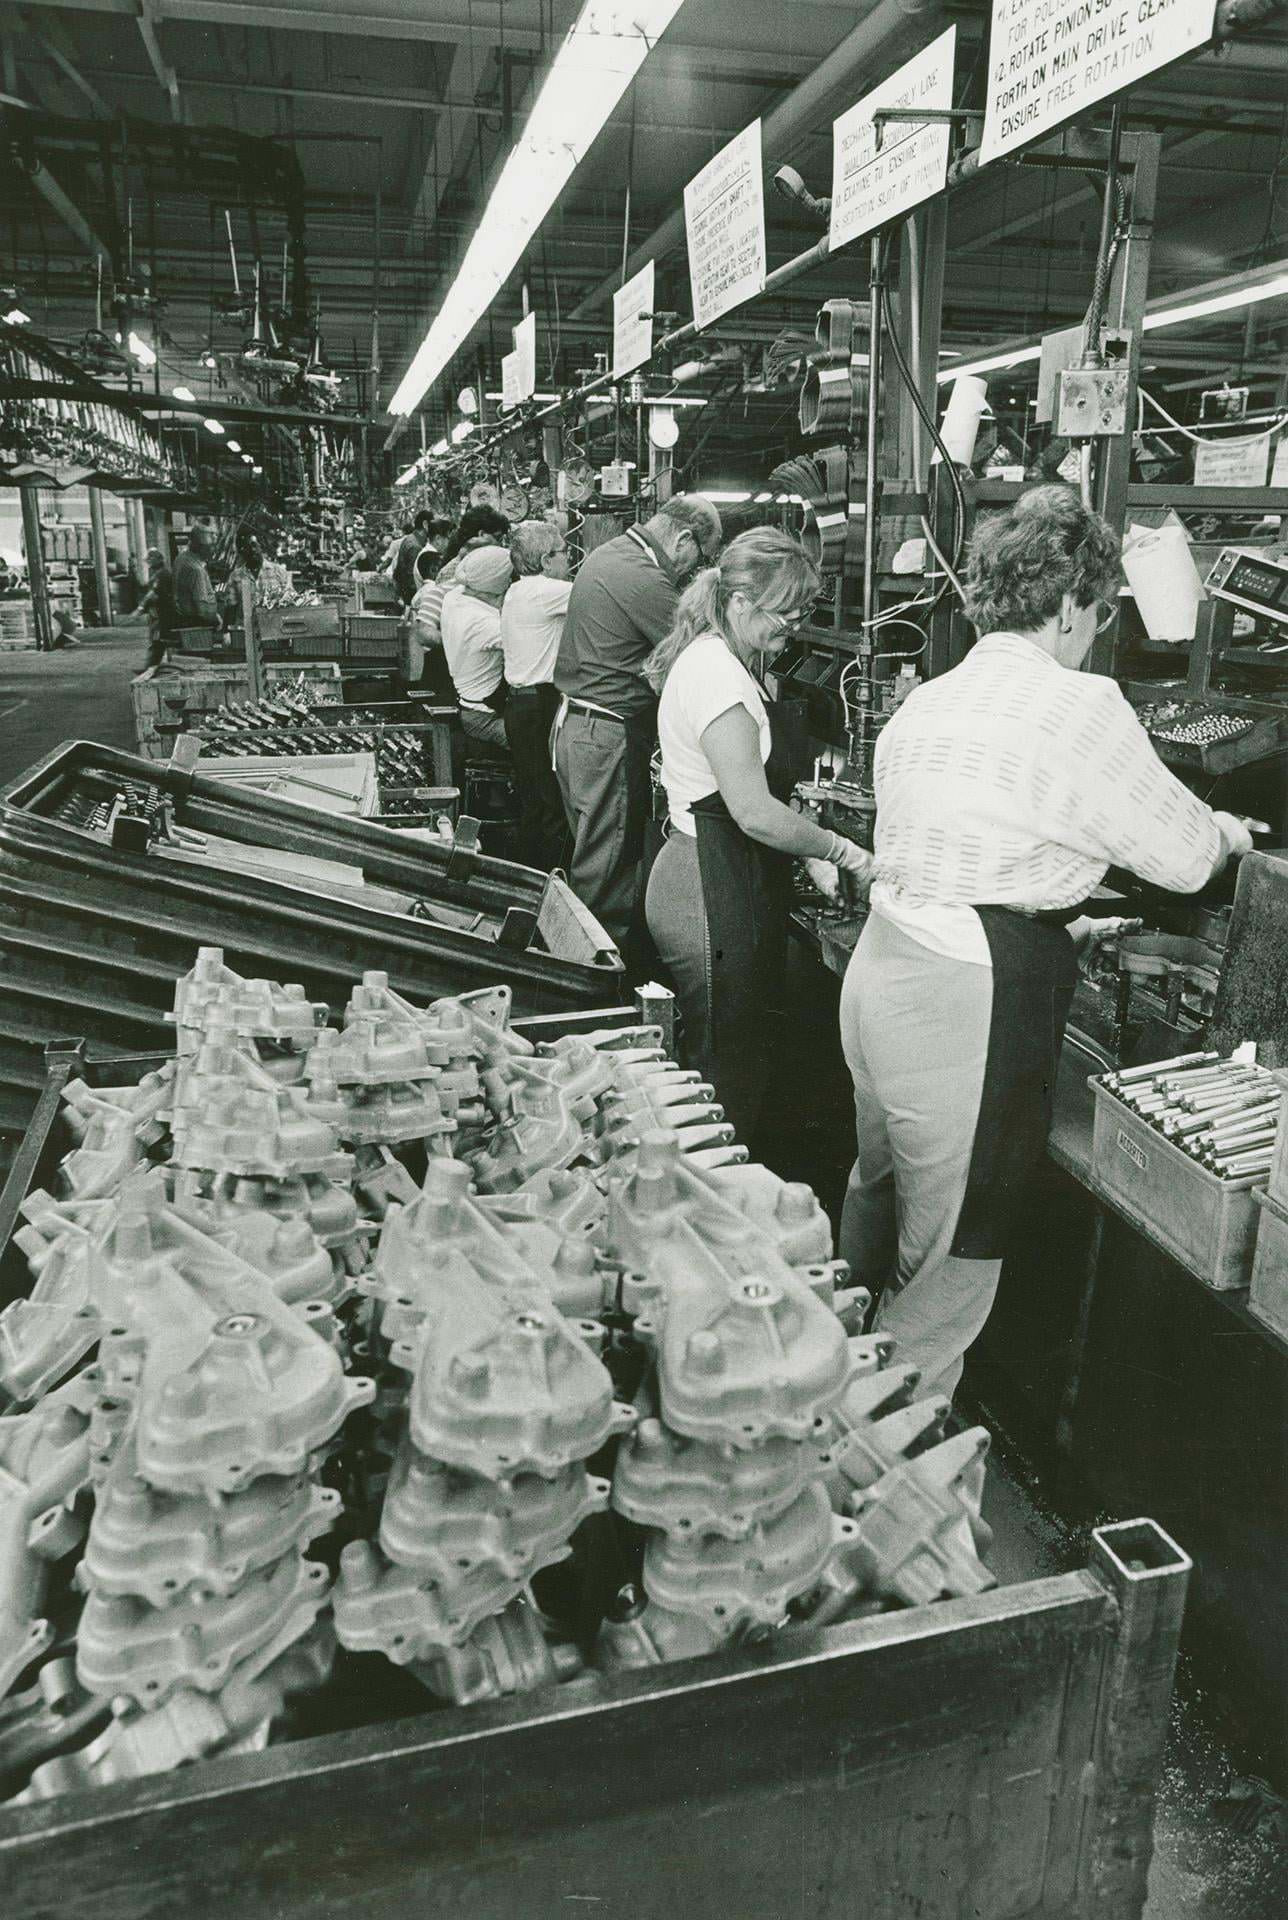 Inglis plant, Strachan Avenue, workers on washing machine assembly line, 1989